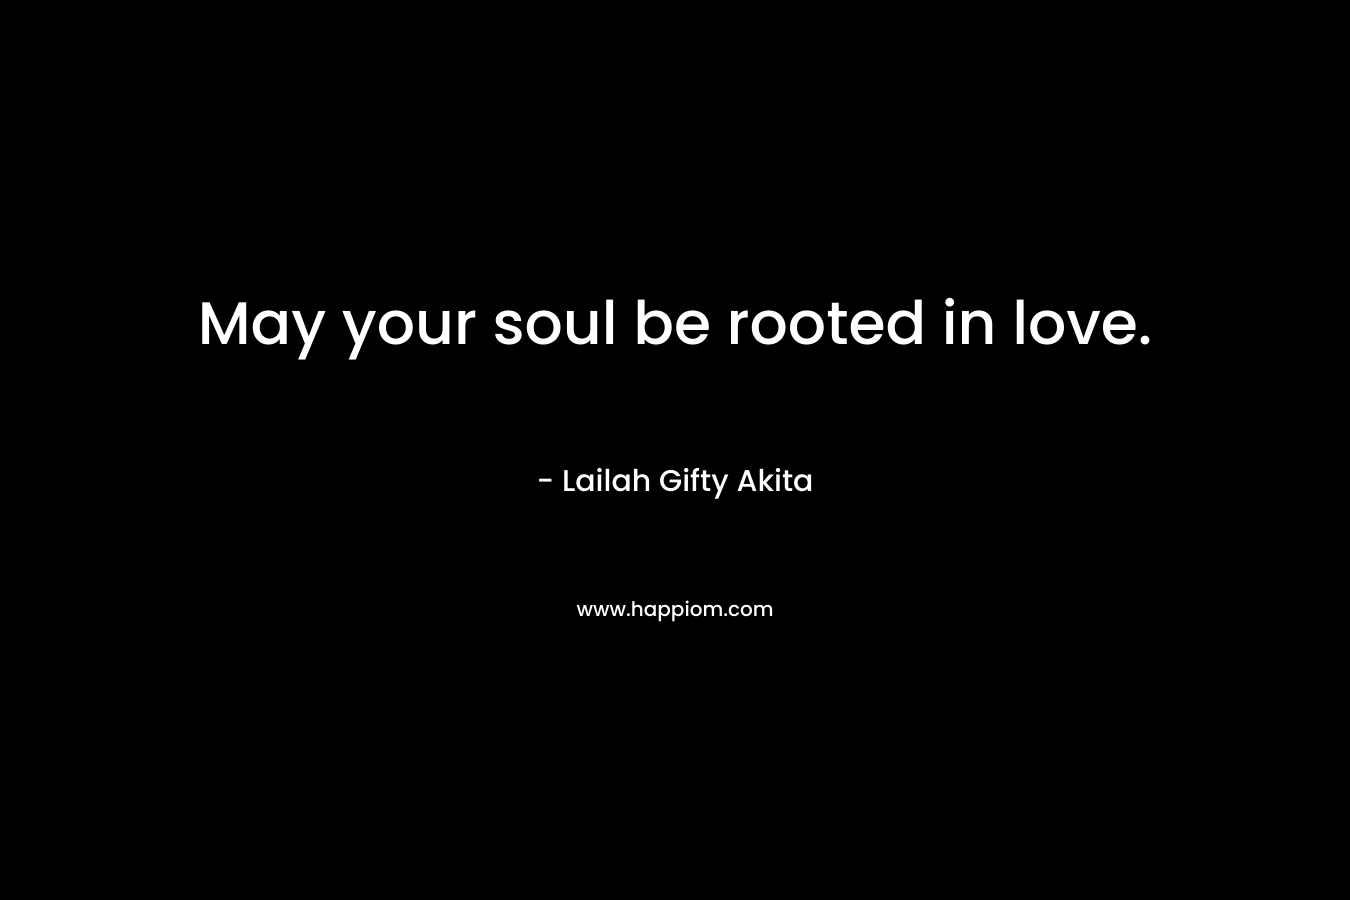 May your soul be rooted in love.